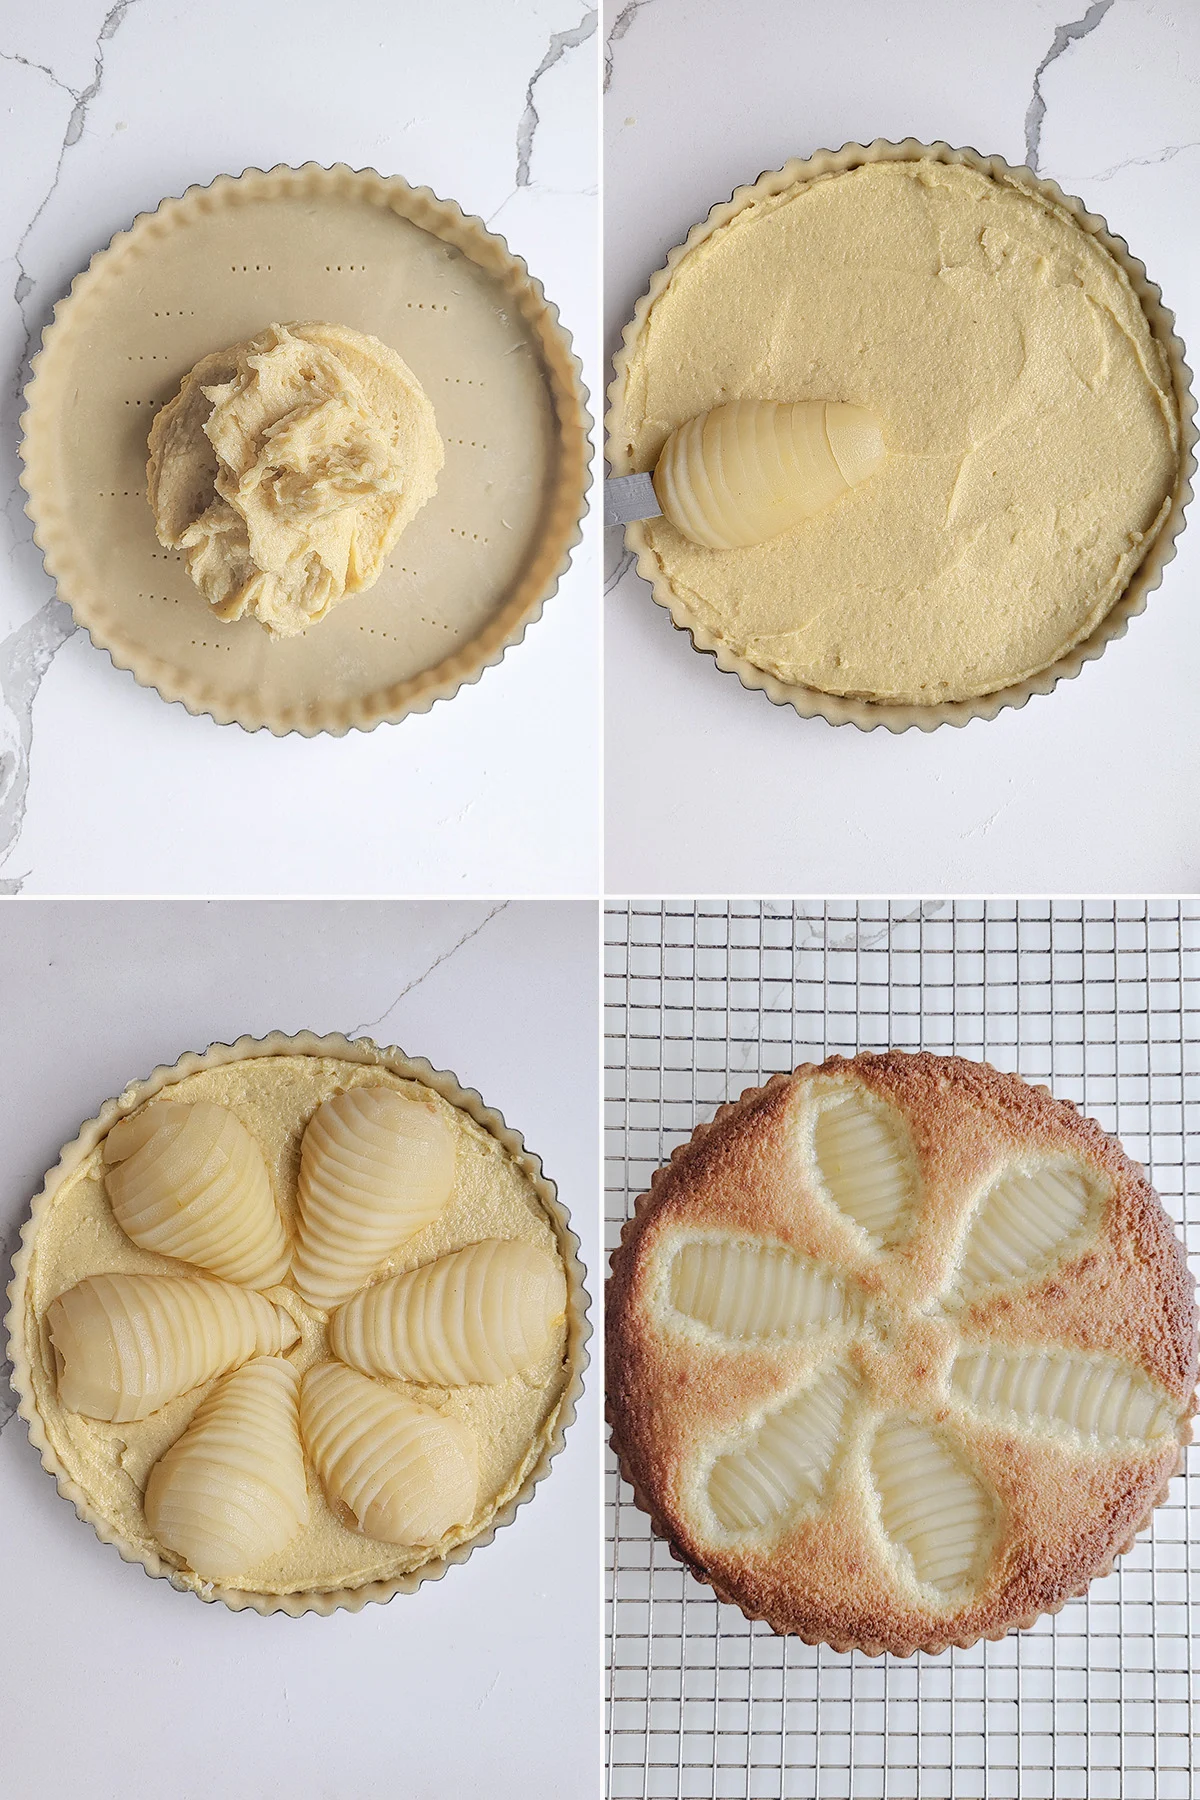 Frangipane in a tart shell with sliced pears. Tart before and after baking.